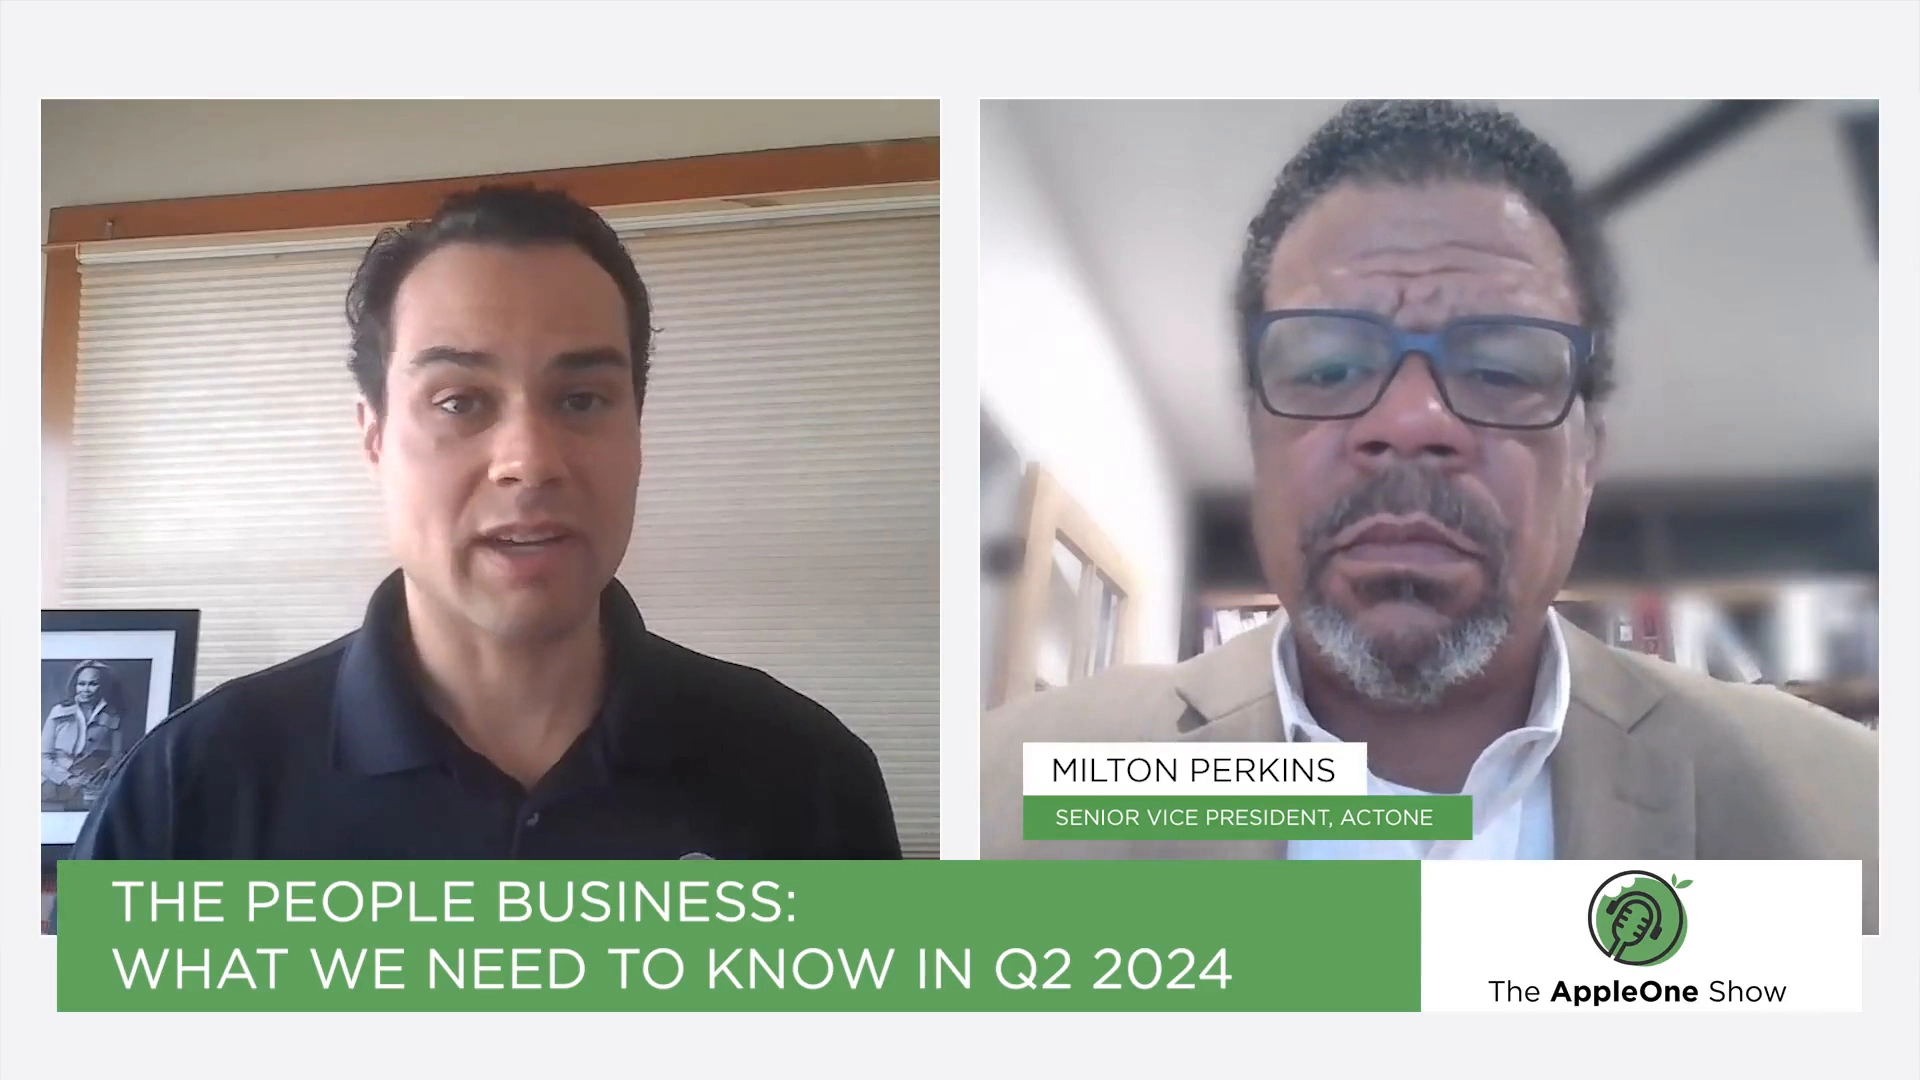 The People Business: What We Need to Know in Q2 2024